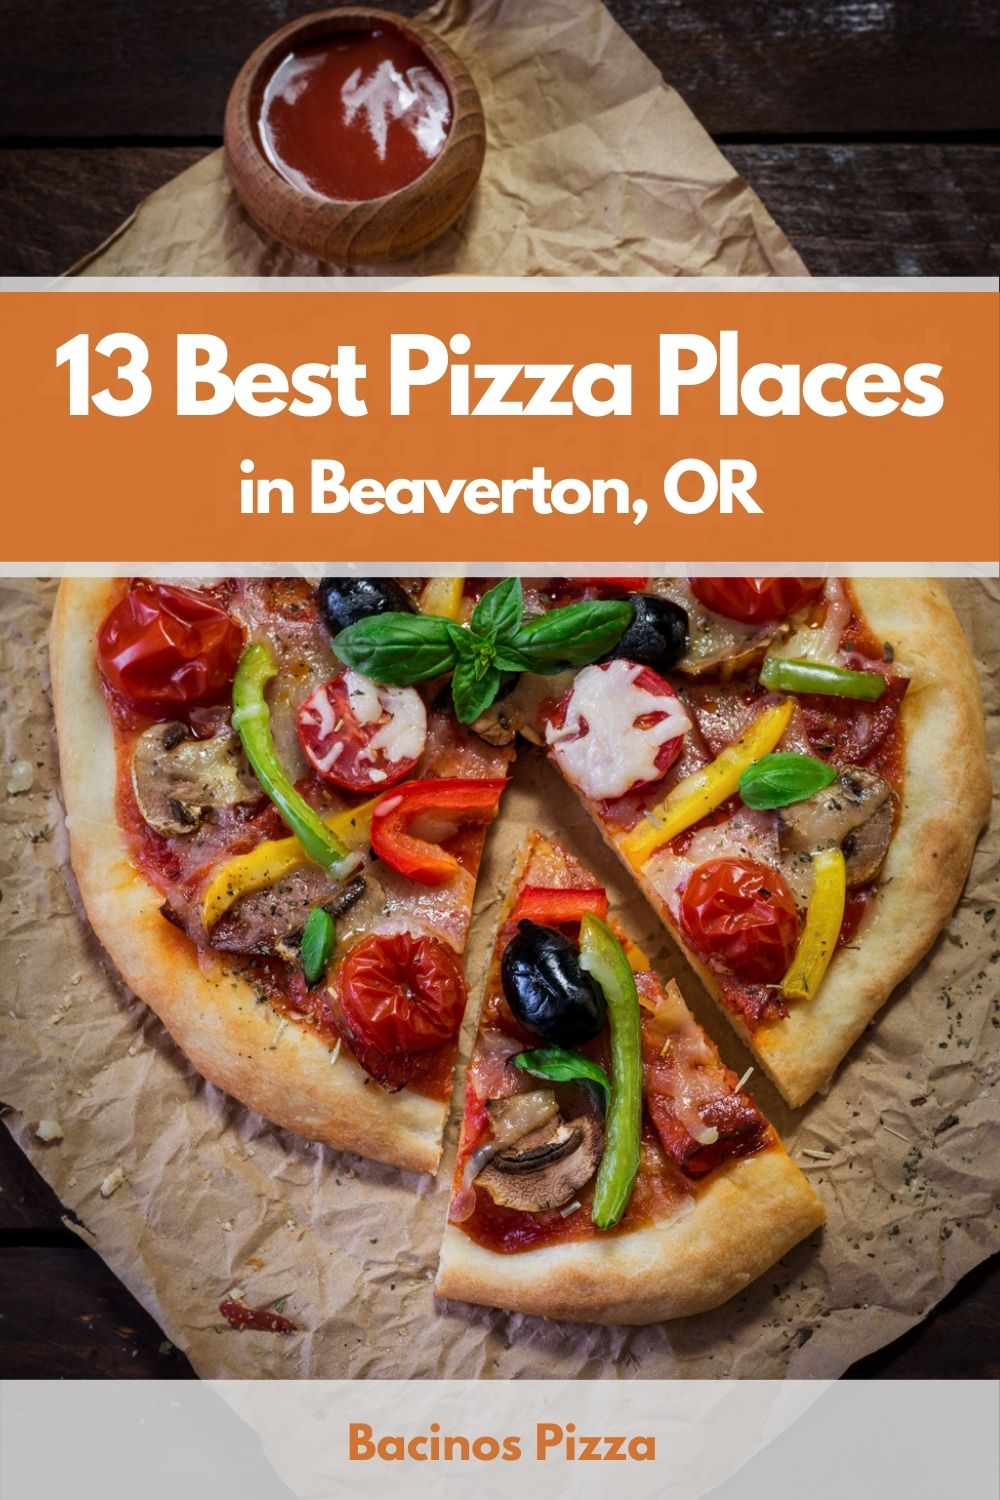 13 Best Pizza Places in Beaverton, OR pin